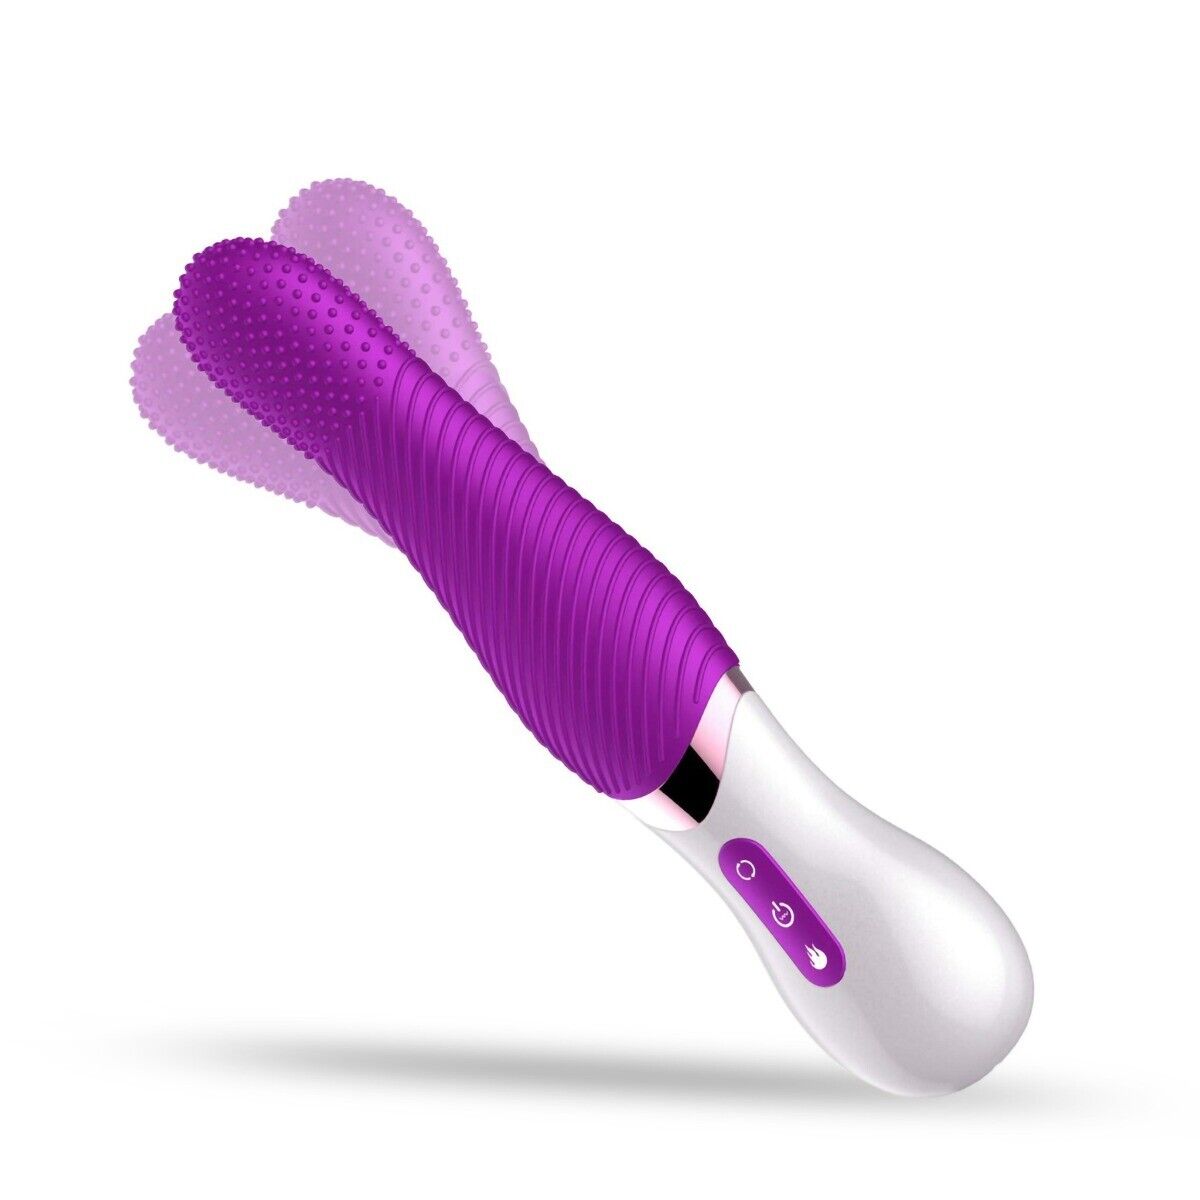 Rechargeable Flickering Tongue Orgasm Vibrator Oral Sex Toys for Women Couples